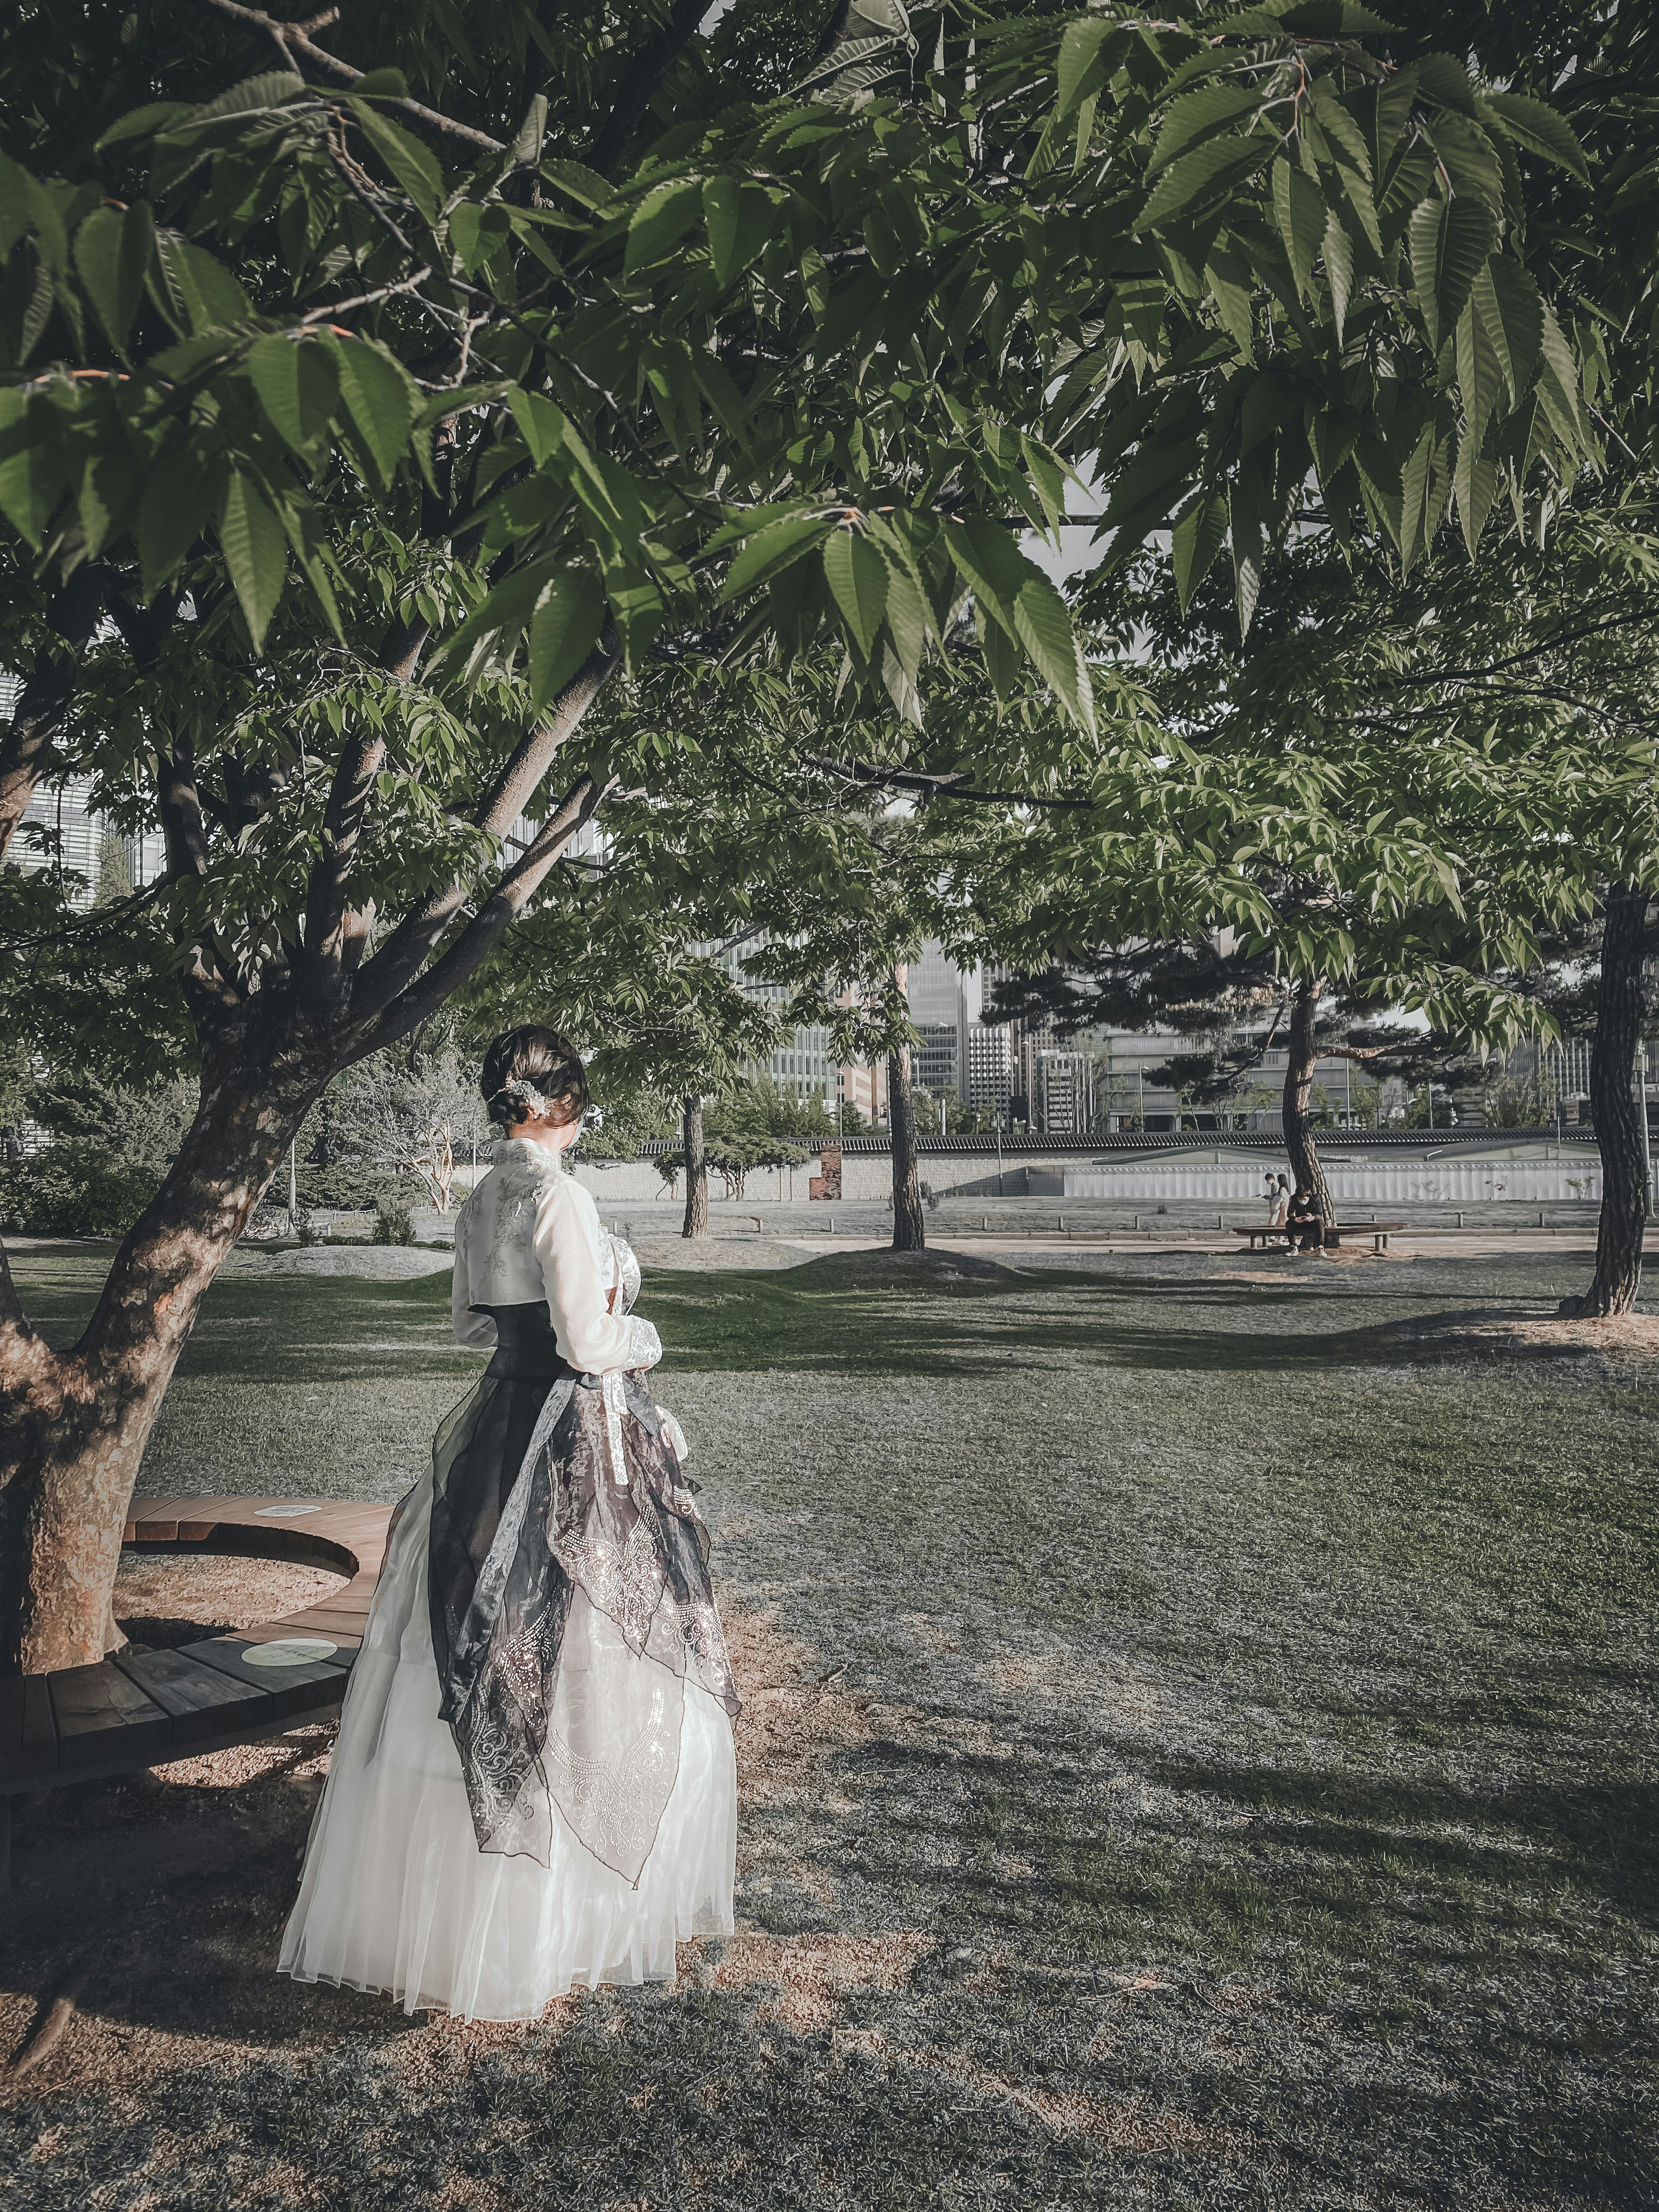 woman in white wedding dress standing under green tree during daytime